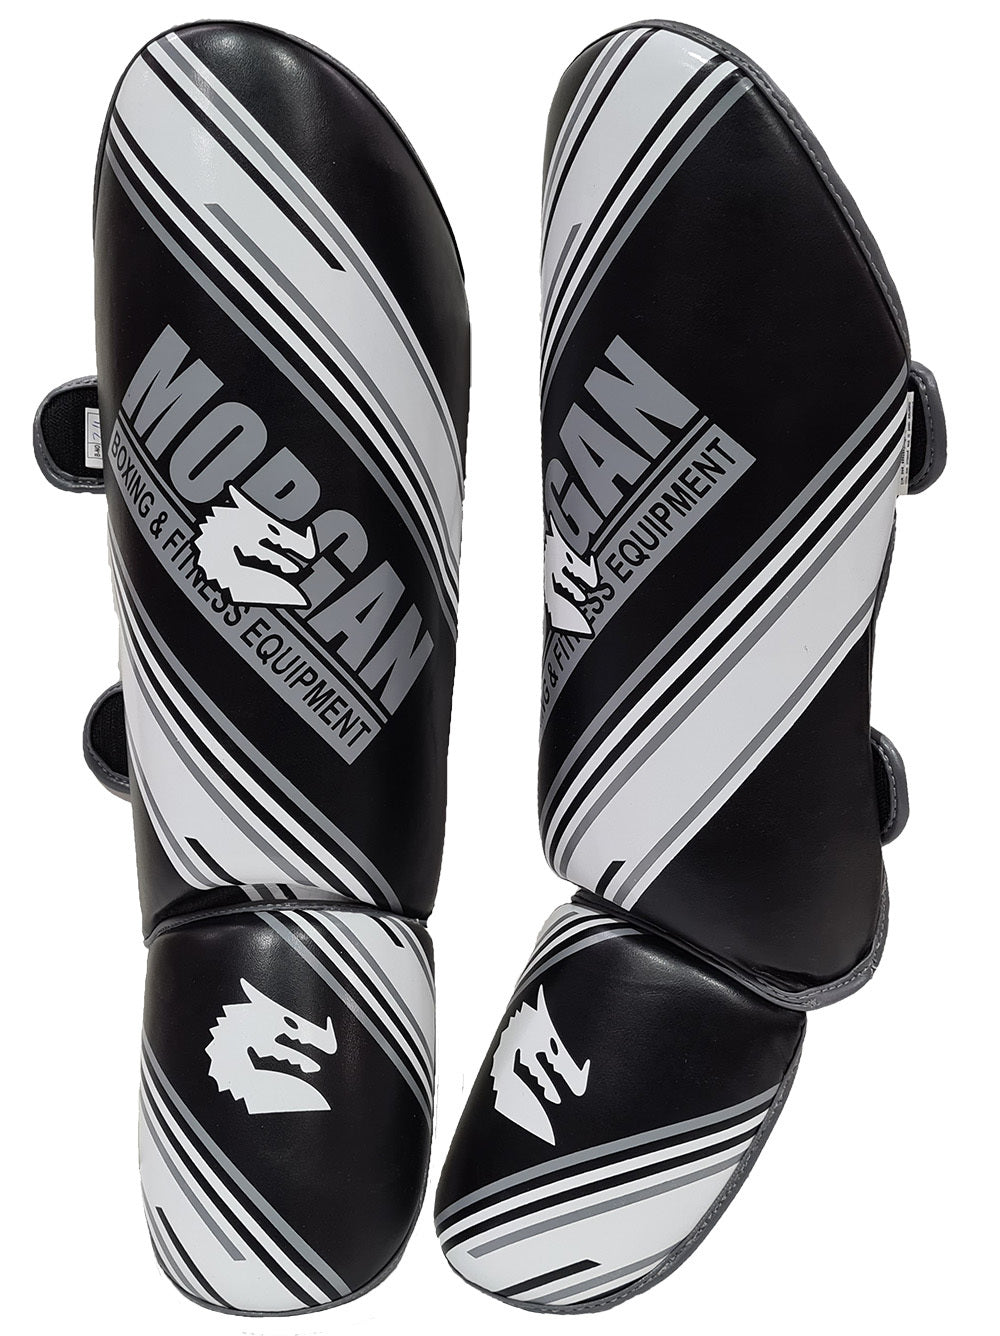 Fitness Hero presents the Morgan Aventus shin guards. The Aventus shin guards are a true intermediate to advanced user shin protectors. The Aventus model has an all-new and improved shin and instep protection for all martial arts, MMA and Muay Thai training. Available in 4 sizes and the one black & white colour